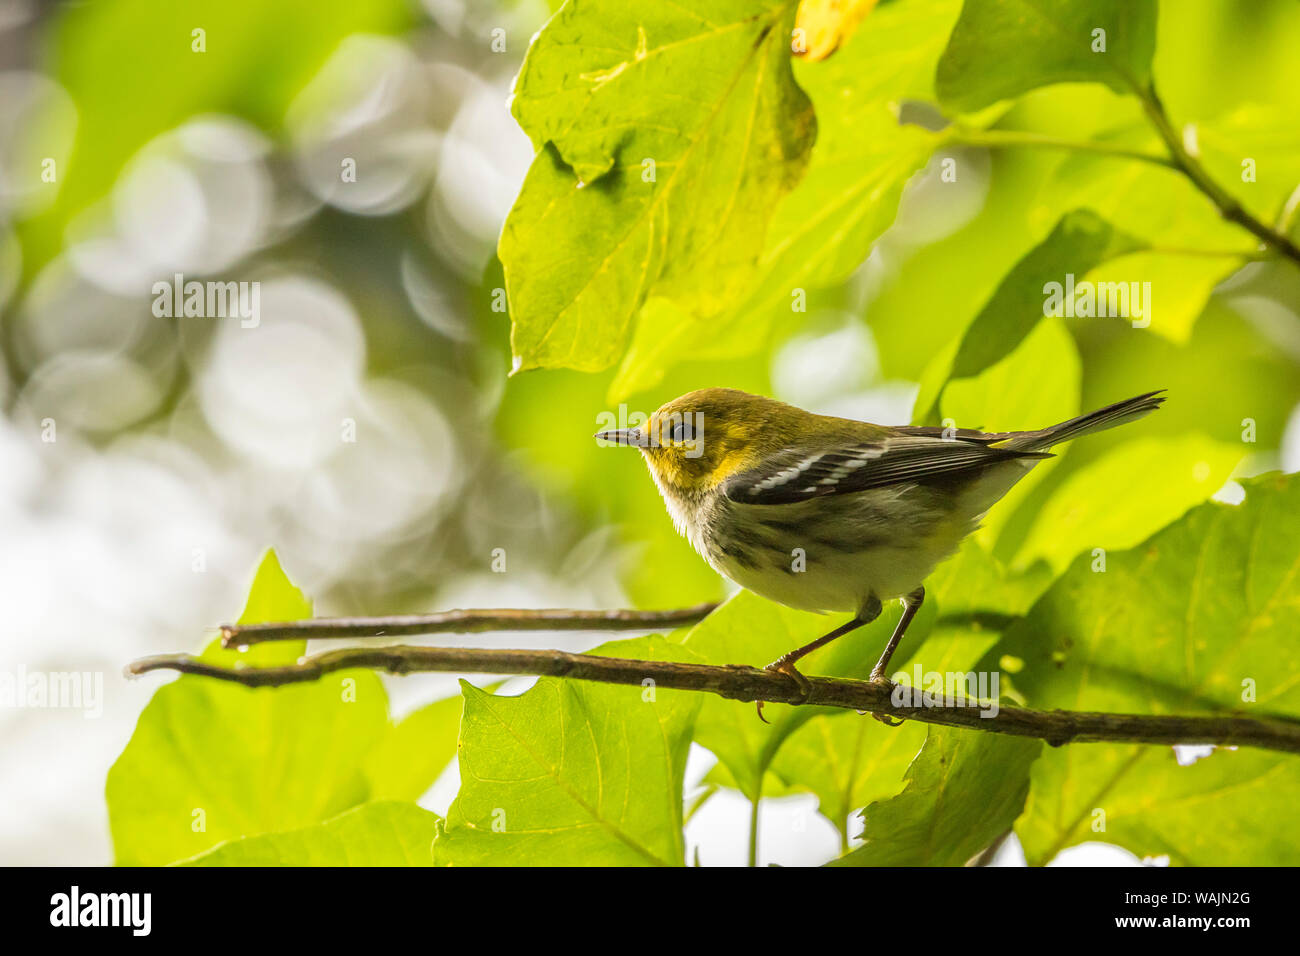 Costa Rica, Monteverde Cloud Forest Reserve. Black-throated green warbler in tree. Credit as: Cathy & Gordon Illg / Jaynes Gallery / DanitaDelimont.com Stock Photo